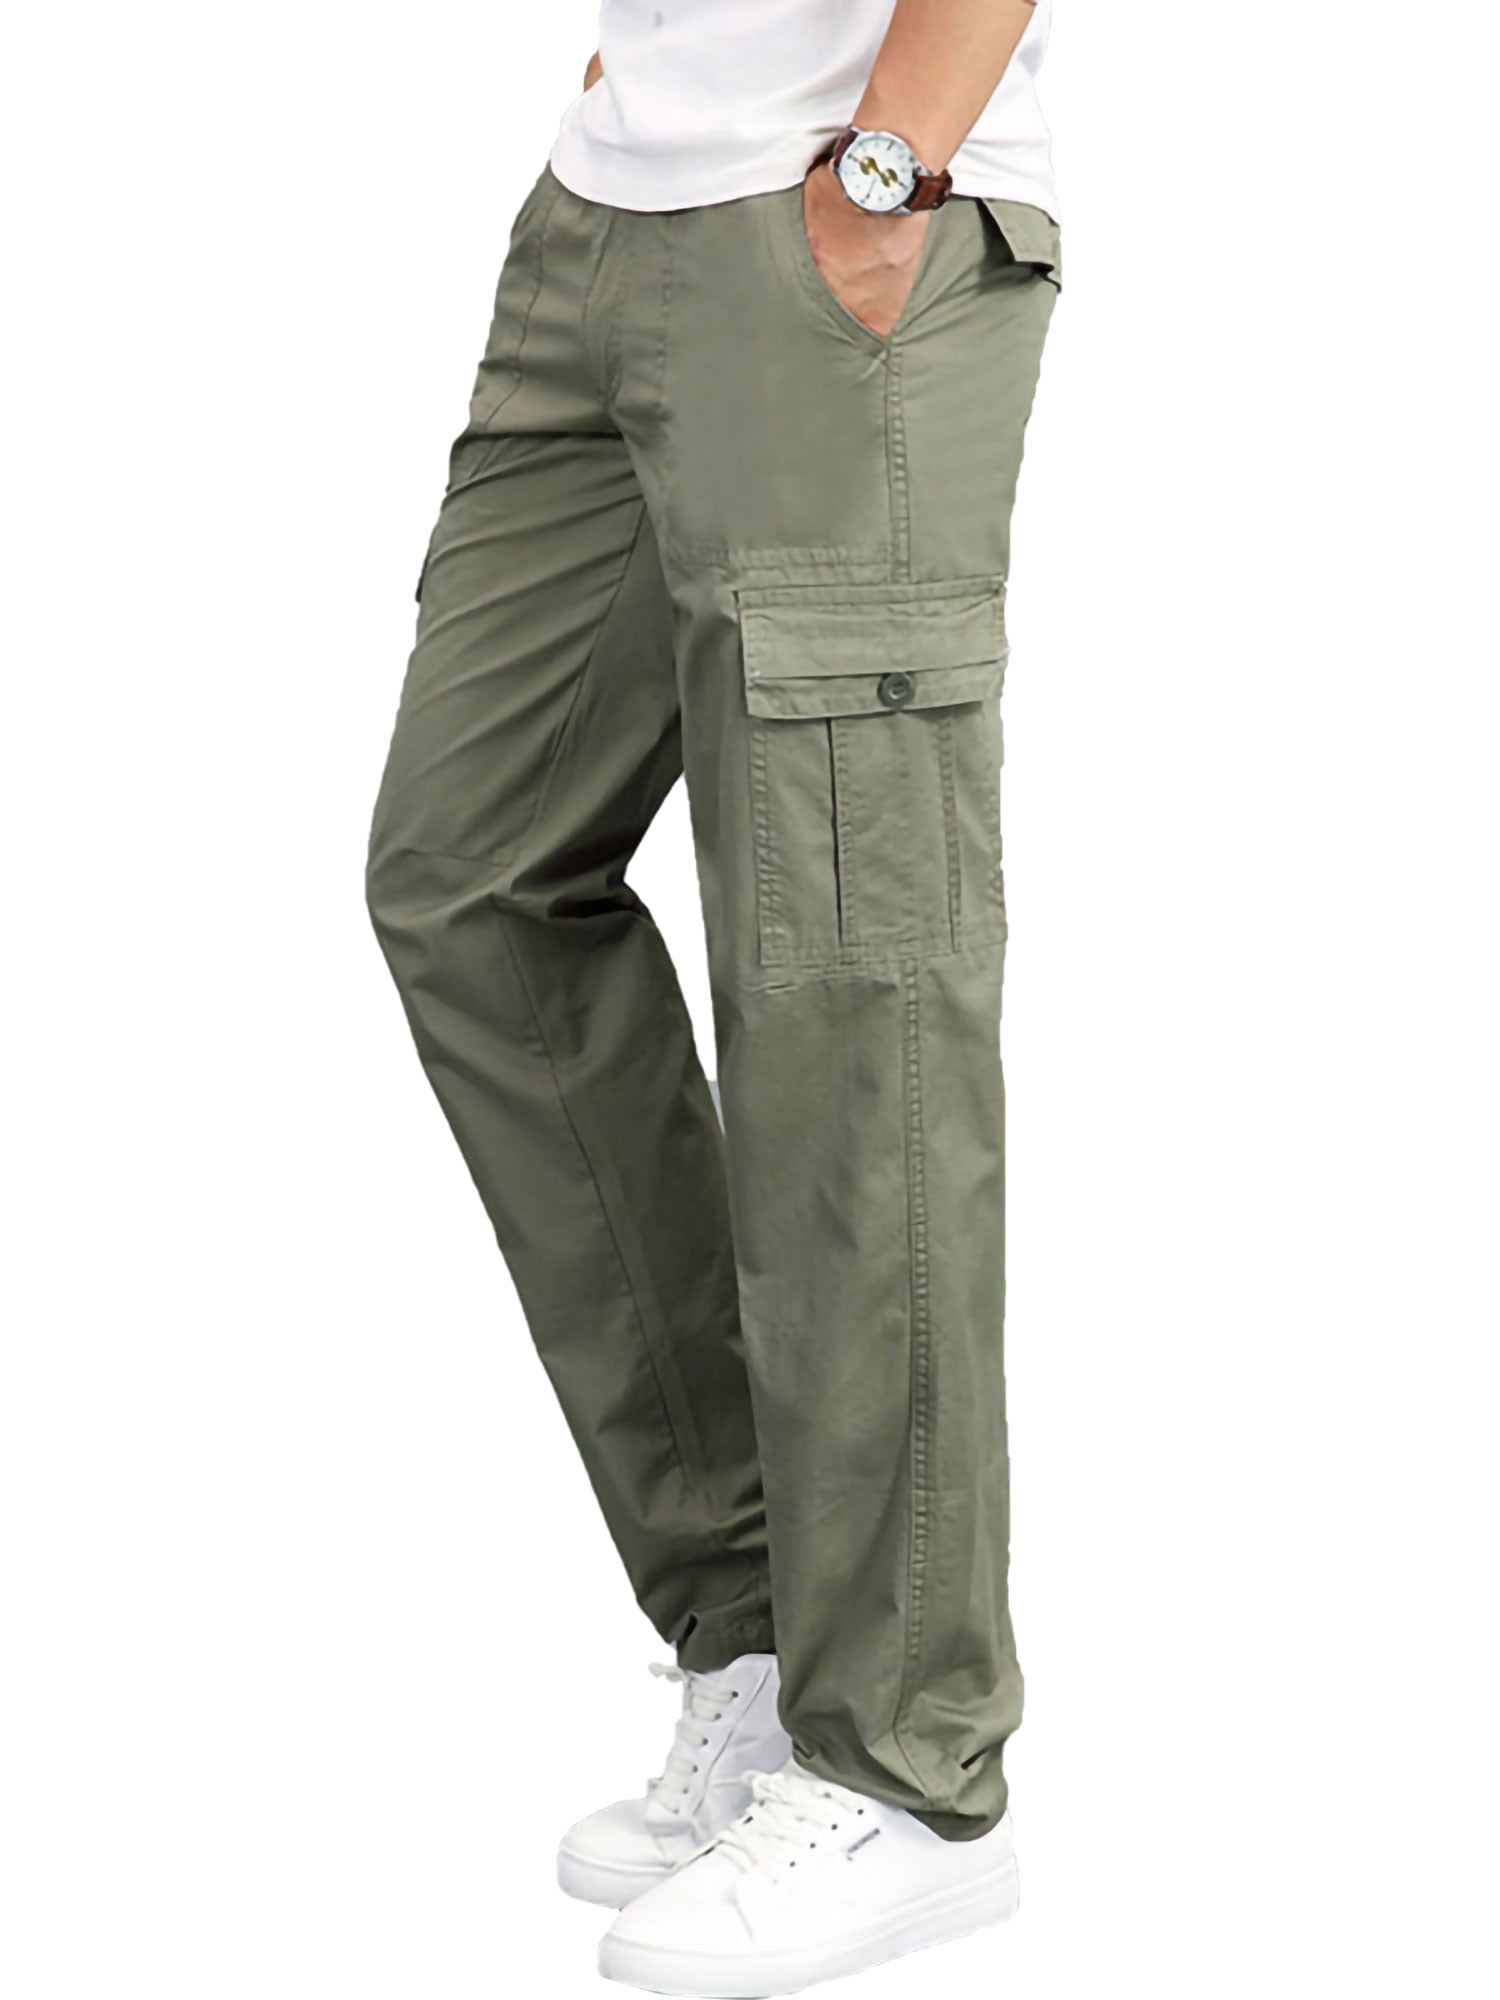 Men's Outdoor Cargo Pants Straight Multi-pocket Hiking Long Trousers Leisure D 